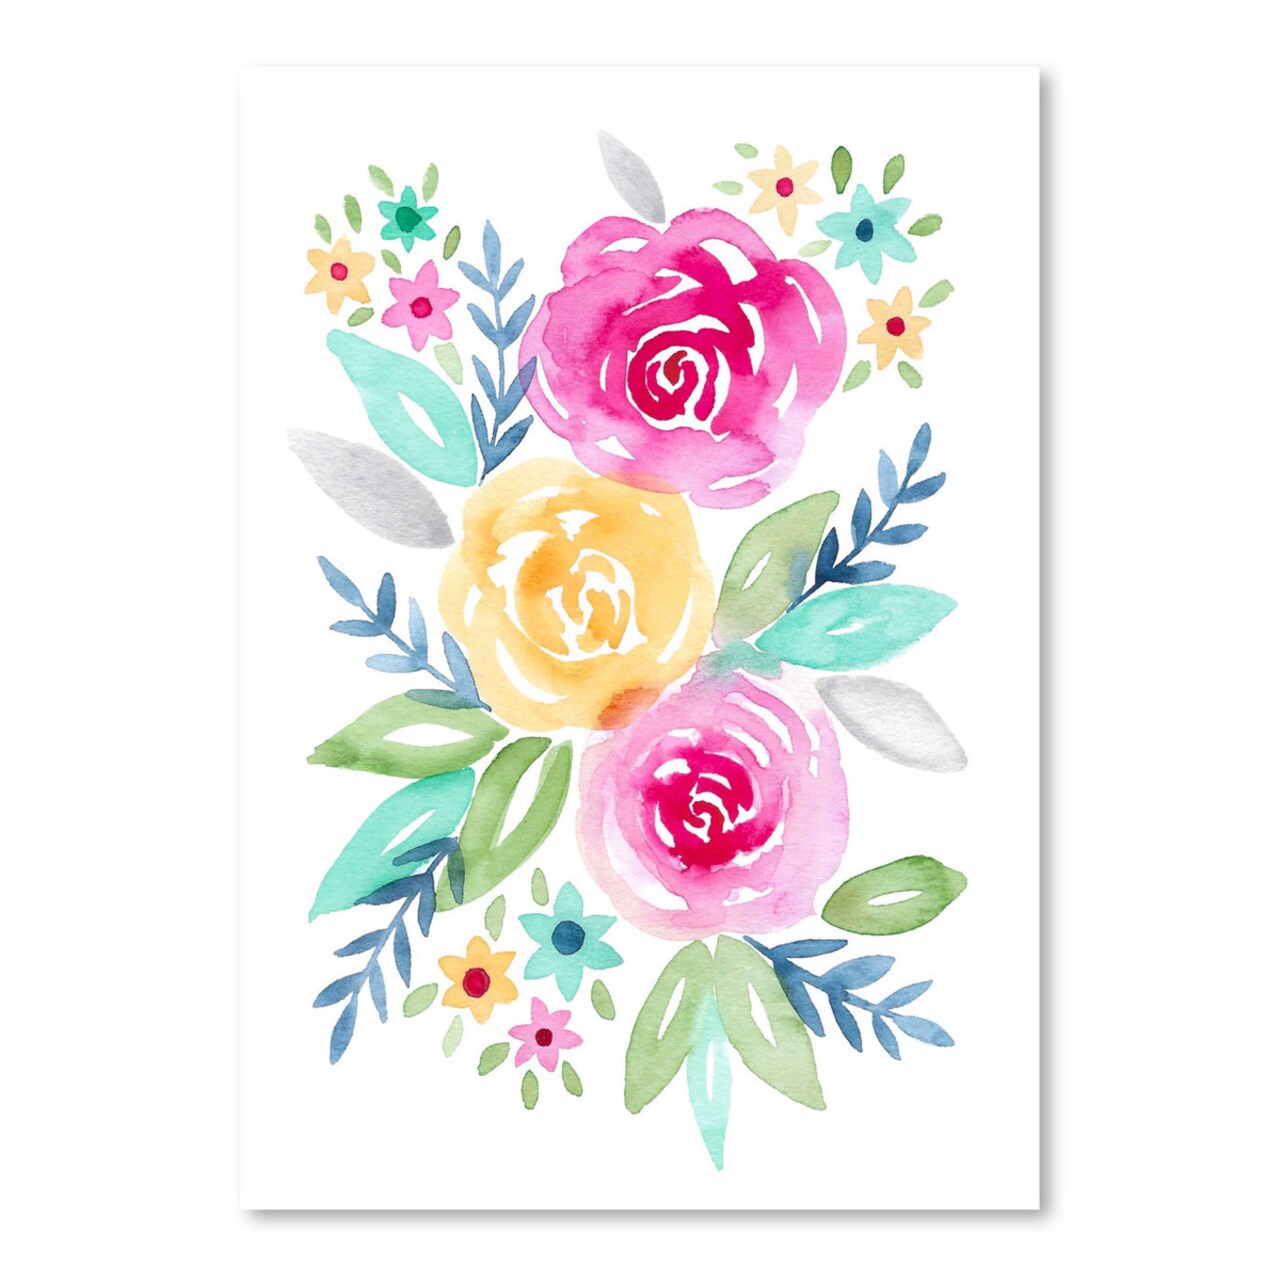 Watercolor Floral 7 by Lisa Nohren  Poster Art Print - Americanflat